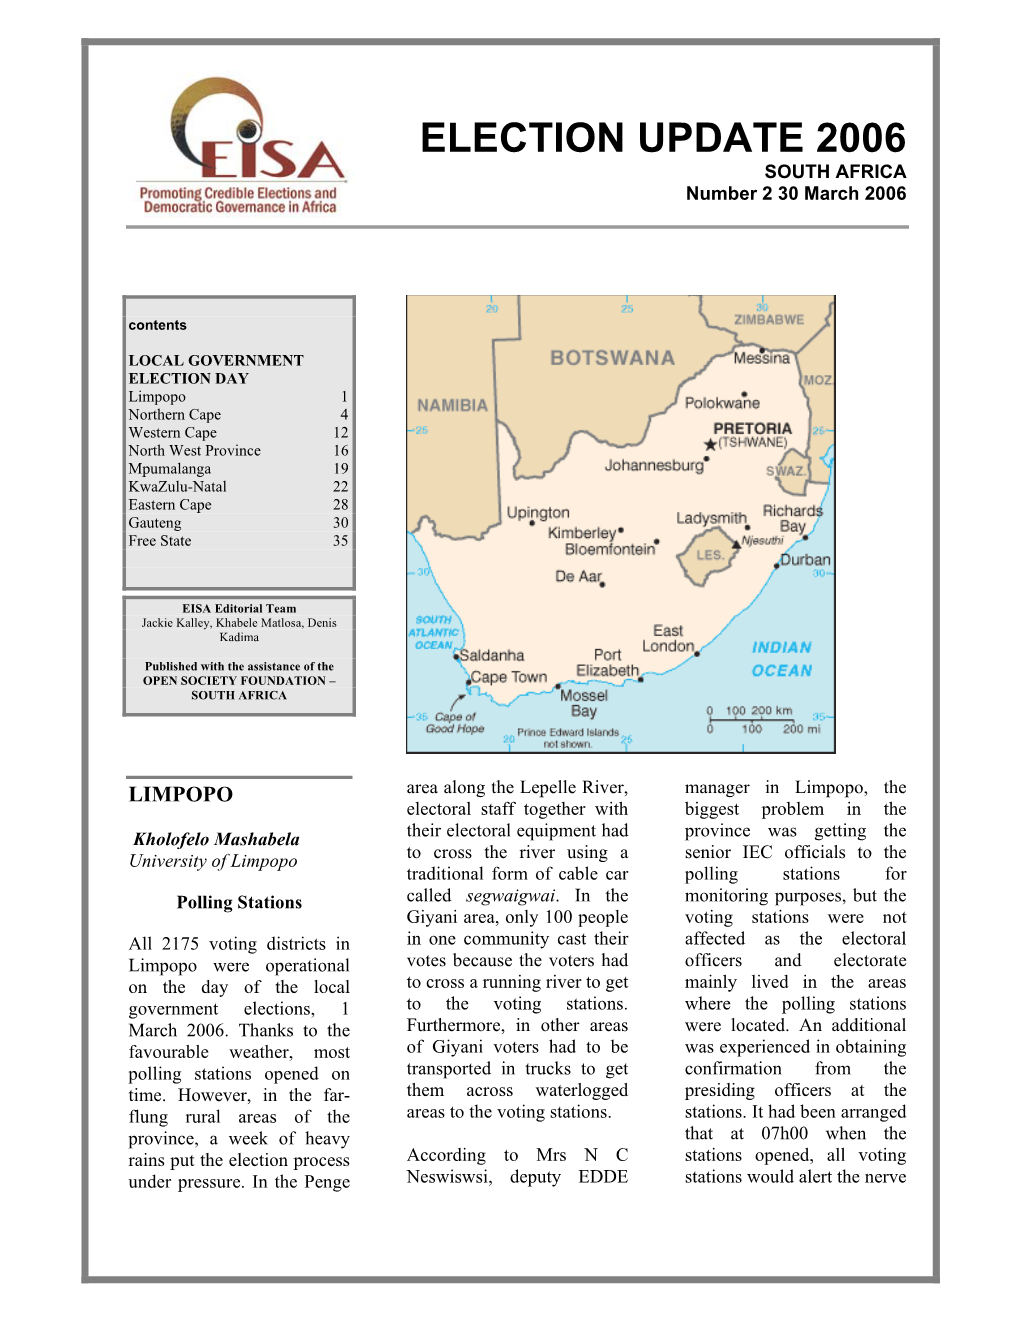 ELECTION UPDATE 2006 SOUTH AFRICA Number 2 30 March 2006